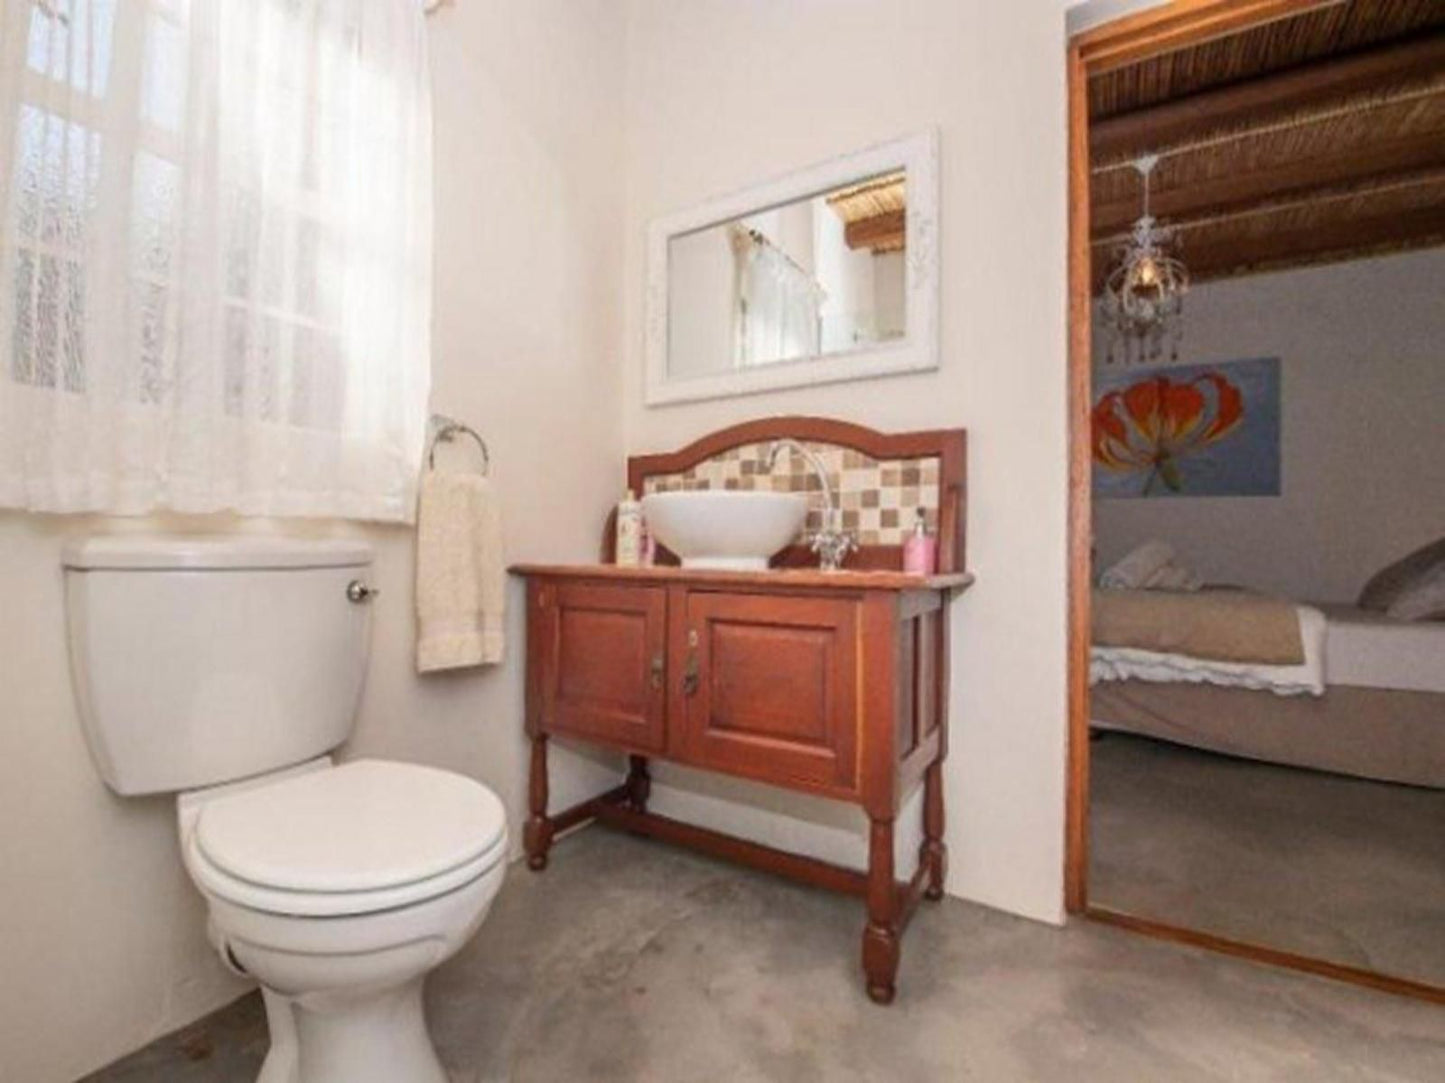 New Beginnings Cottage Drie Kuilen Private Nature Reserve Western Cape South Africa Bathroom